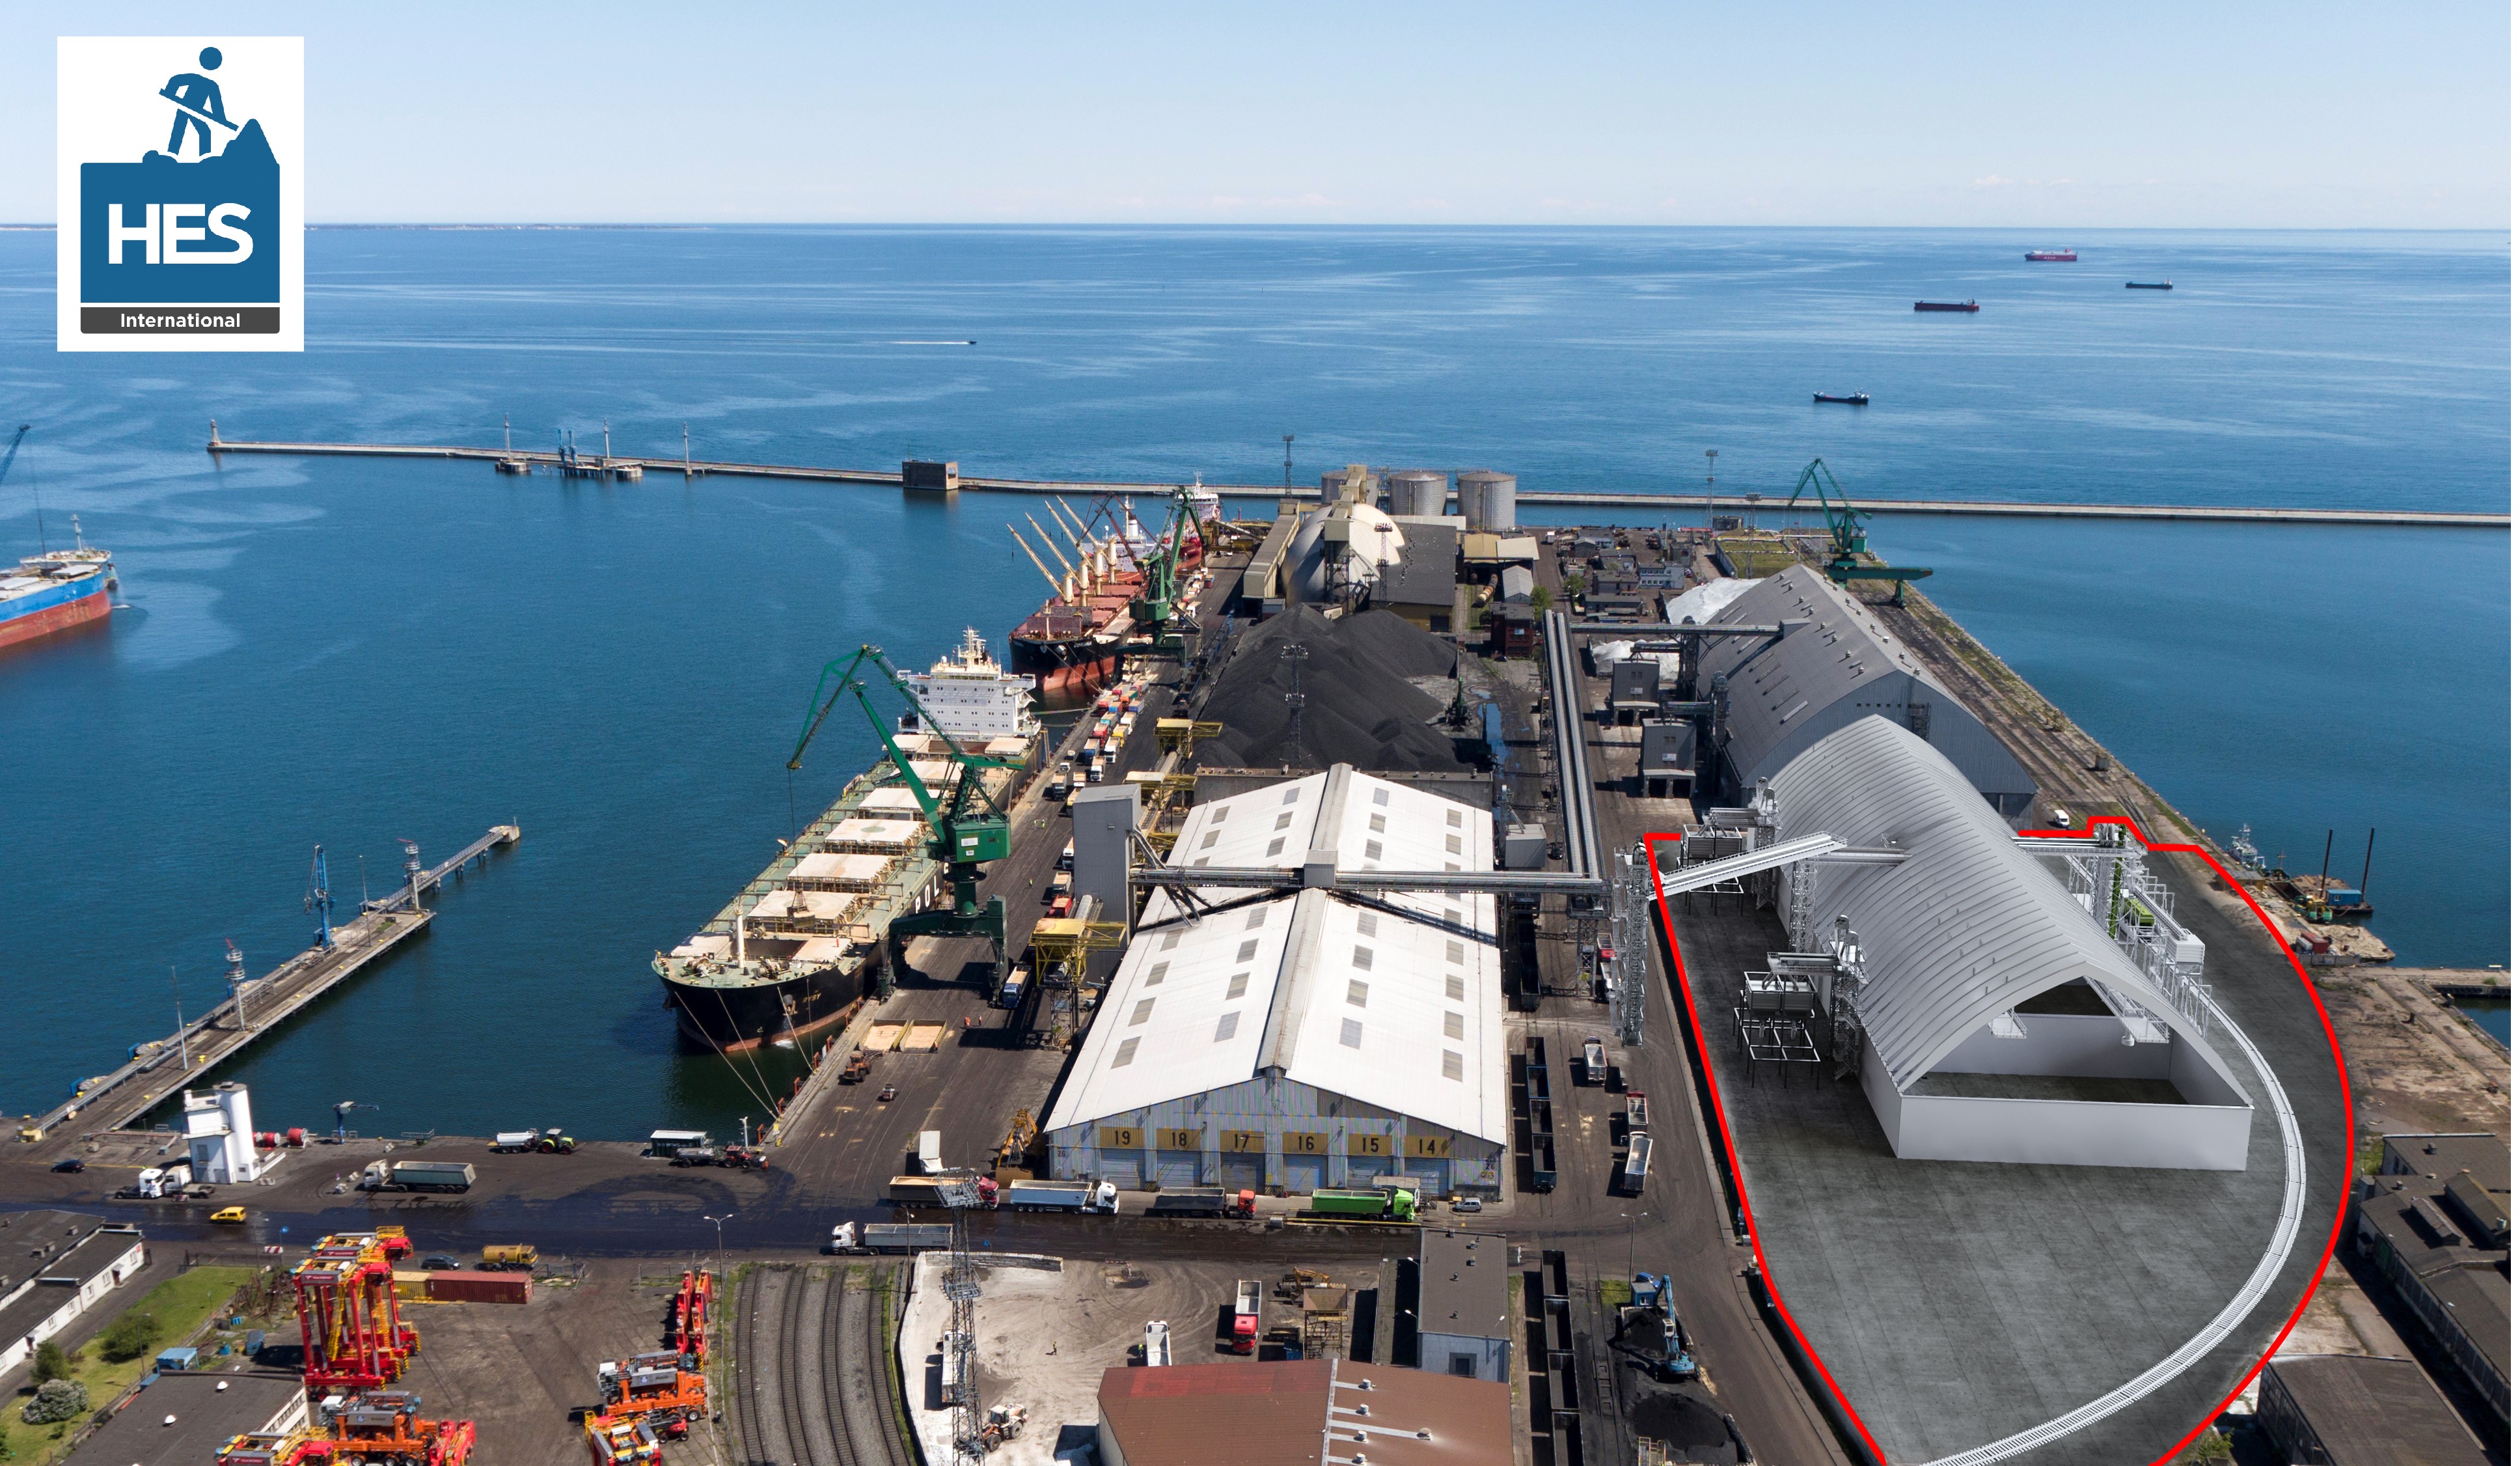 HES Gdynia Bulk Terminal begins construction of new grain handling infrastructure at Port of Gdynia - MarinePoland.com